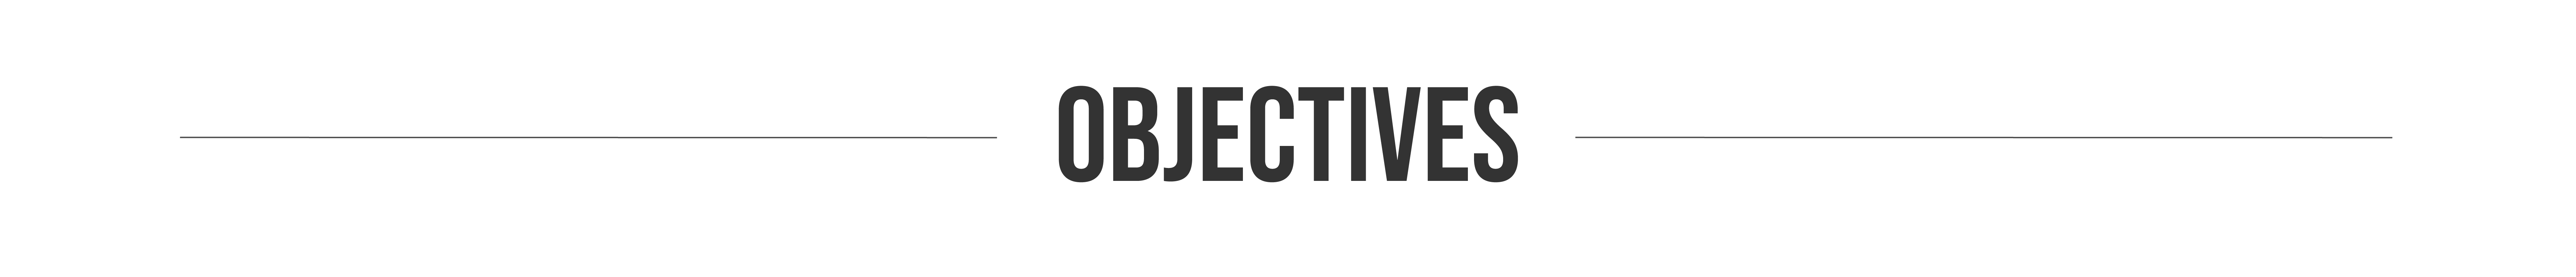 OBJECTIVES-01